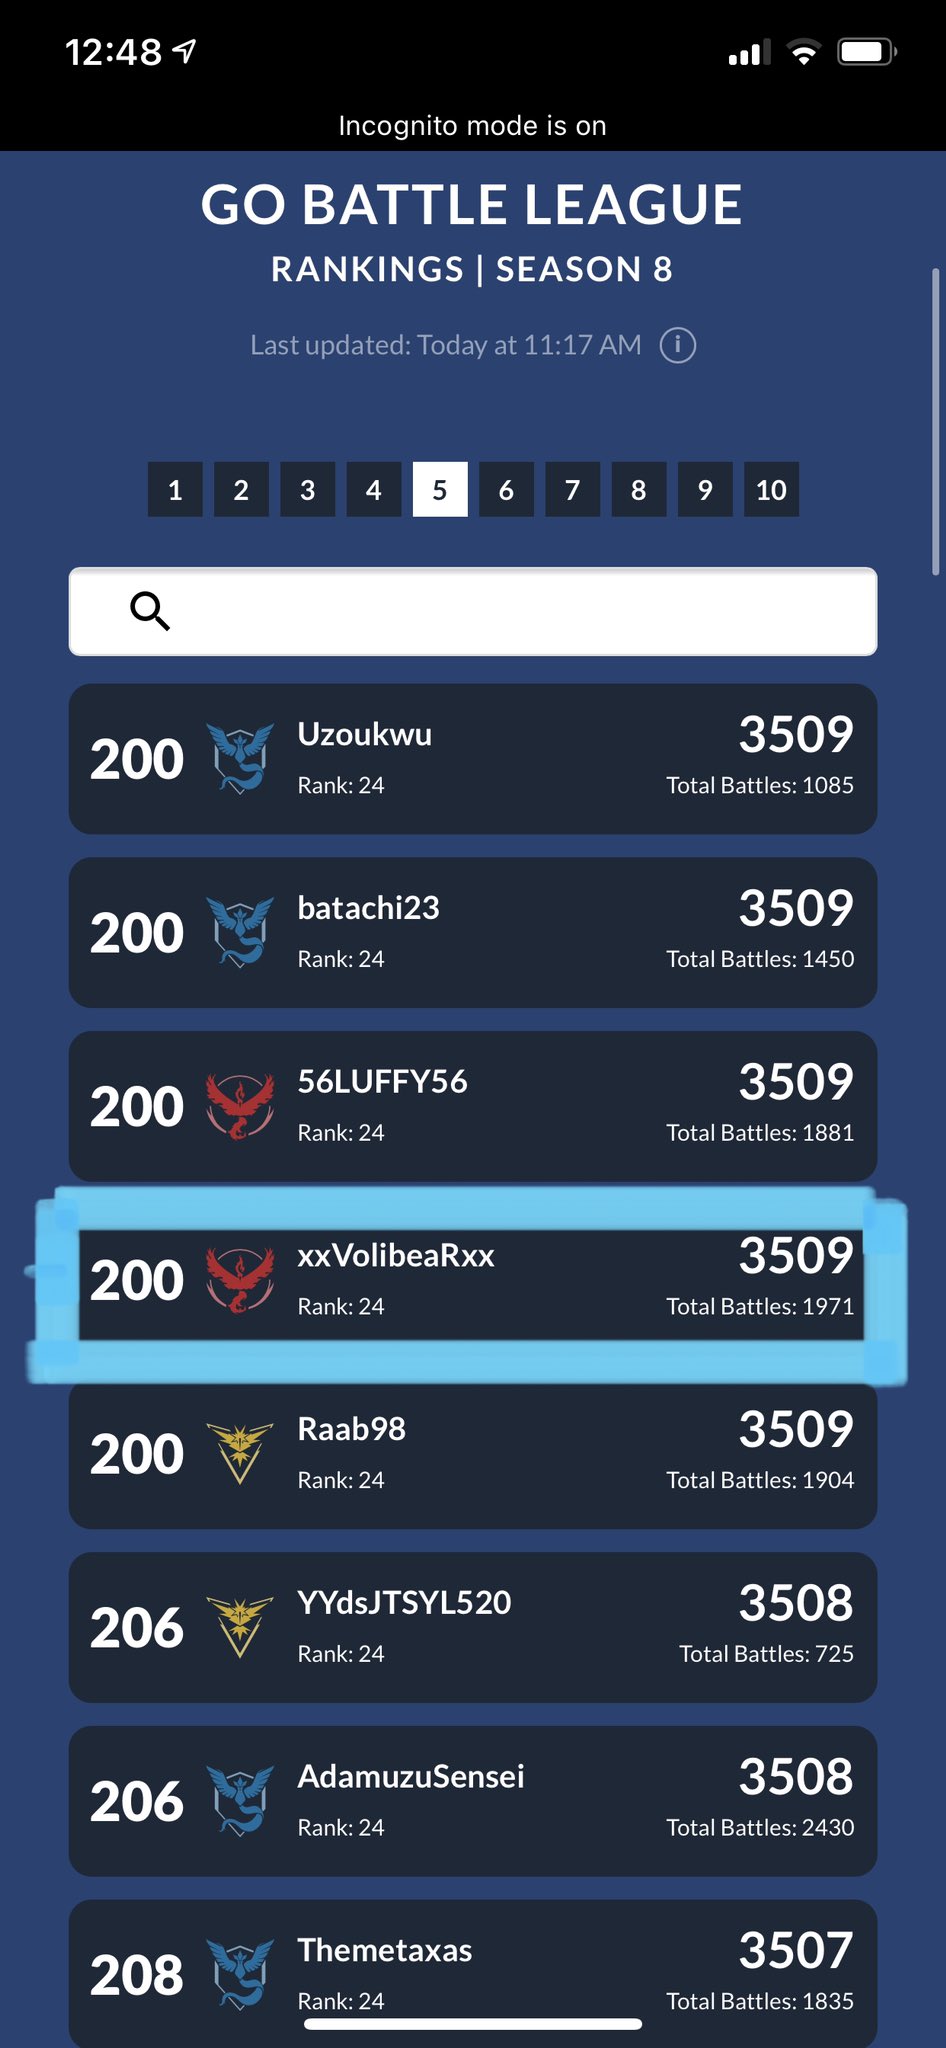 xxVolibeaRxx on X: Officially on the leaderboard with 3500 elo